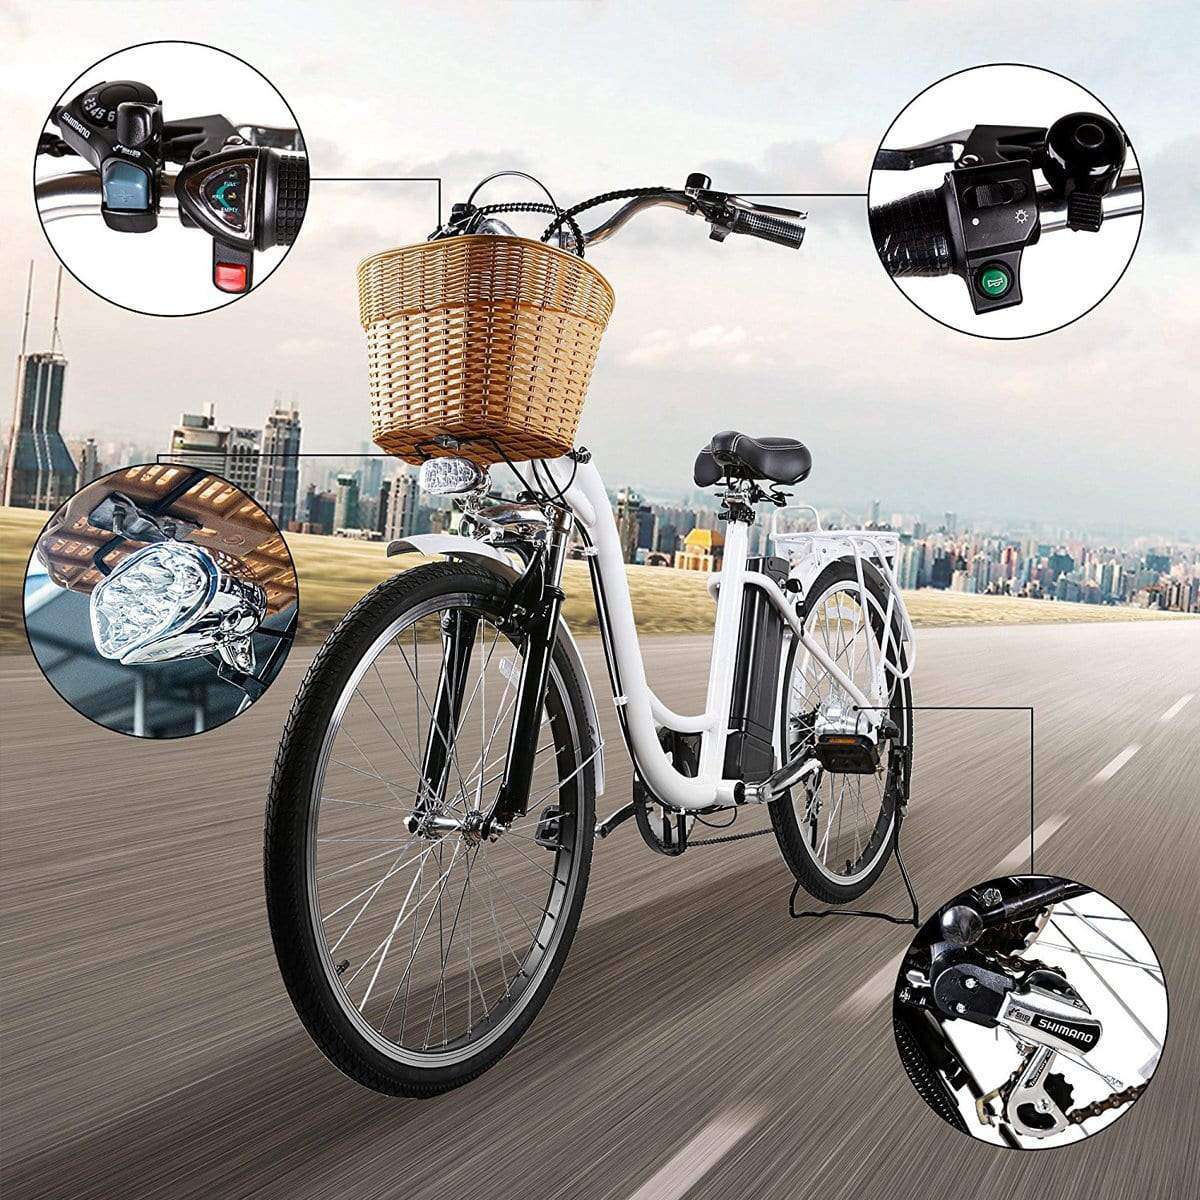 NAKTO 26 inch 250W 19 MPH Camel Electric Bicycle 6 Speed E-Bike 36V Lithium Battery Female/Young Adult White New